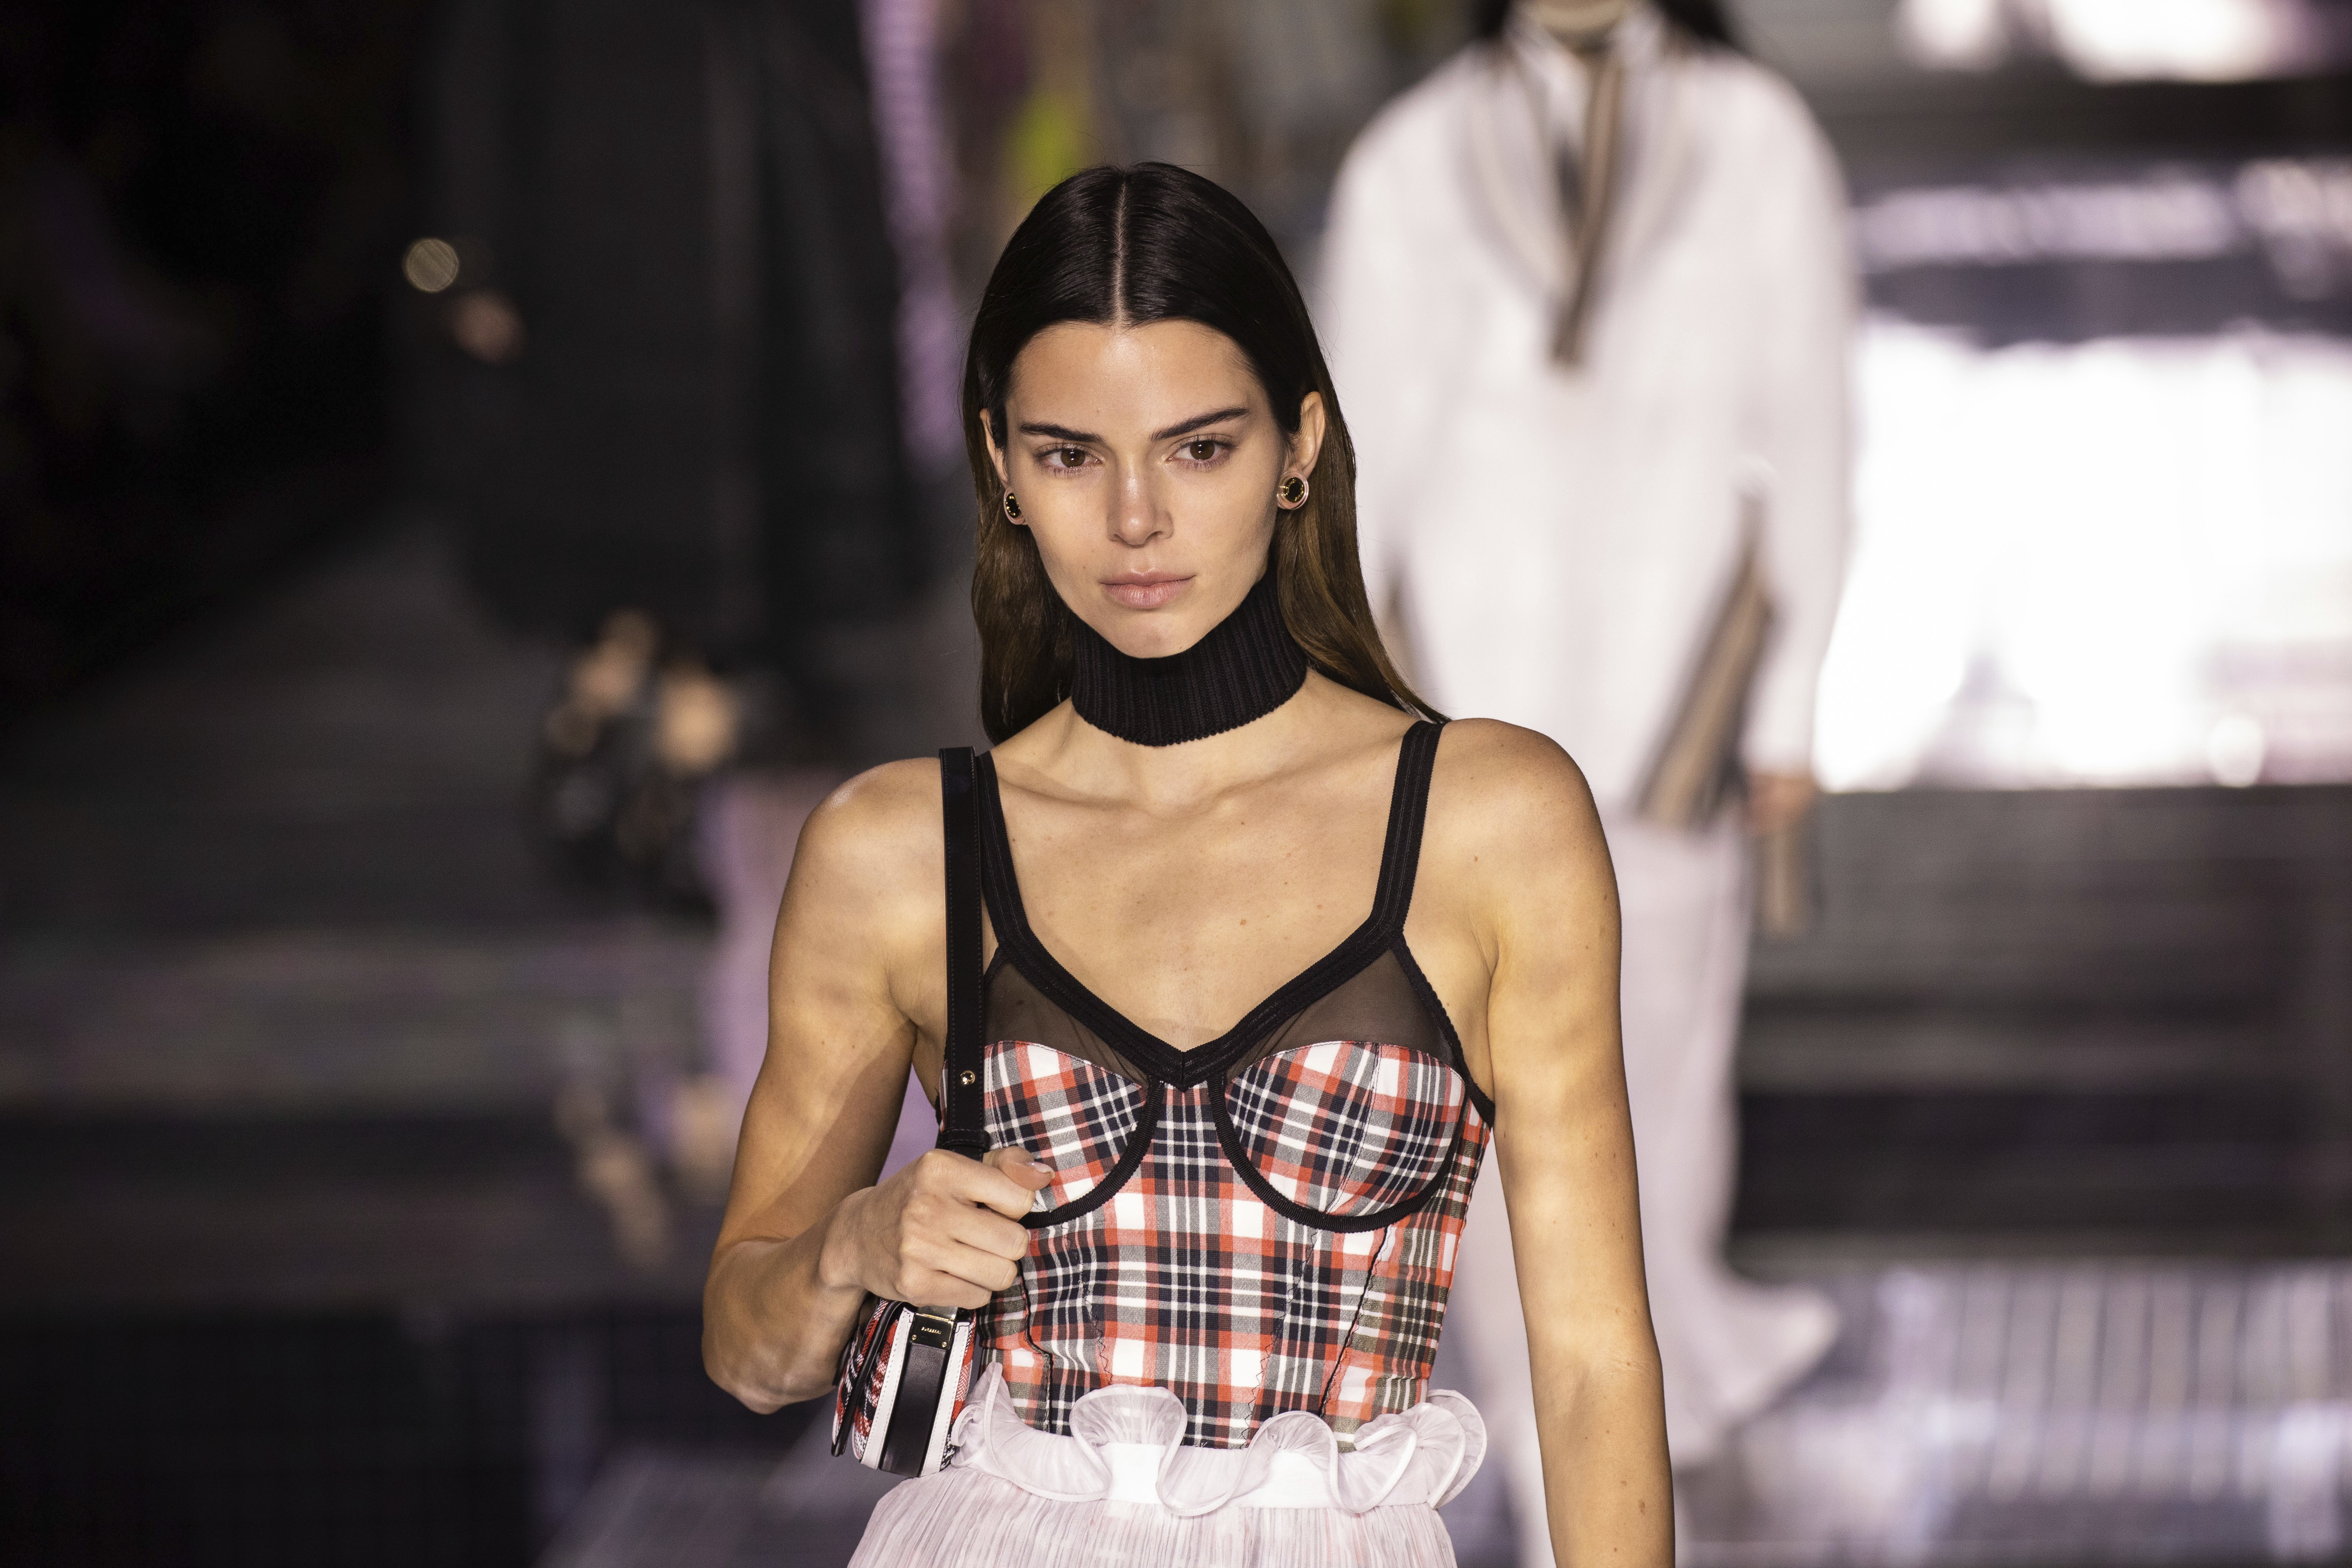 Model Kendall Jenner walked the catwalk for Burberry at London Fashion Week 2020. Photo: Invision/AP